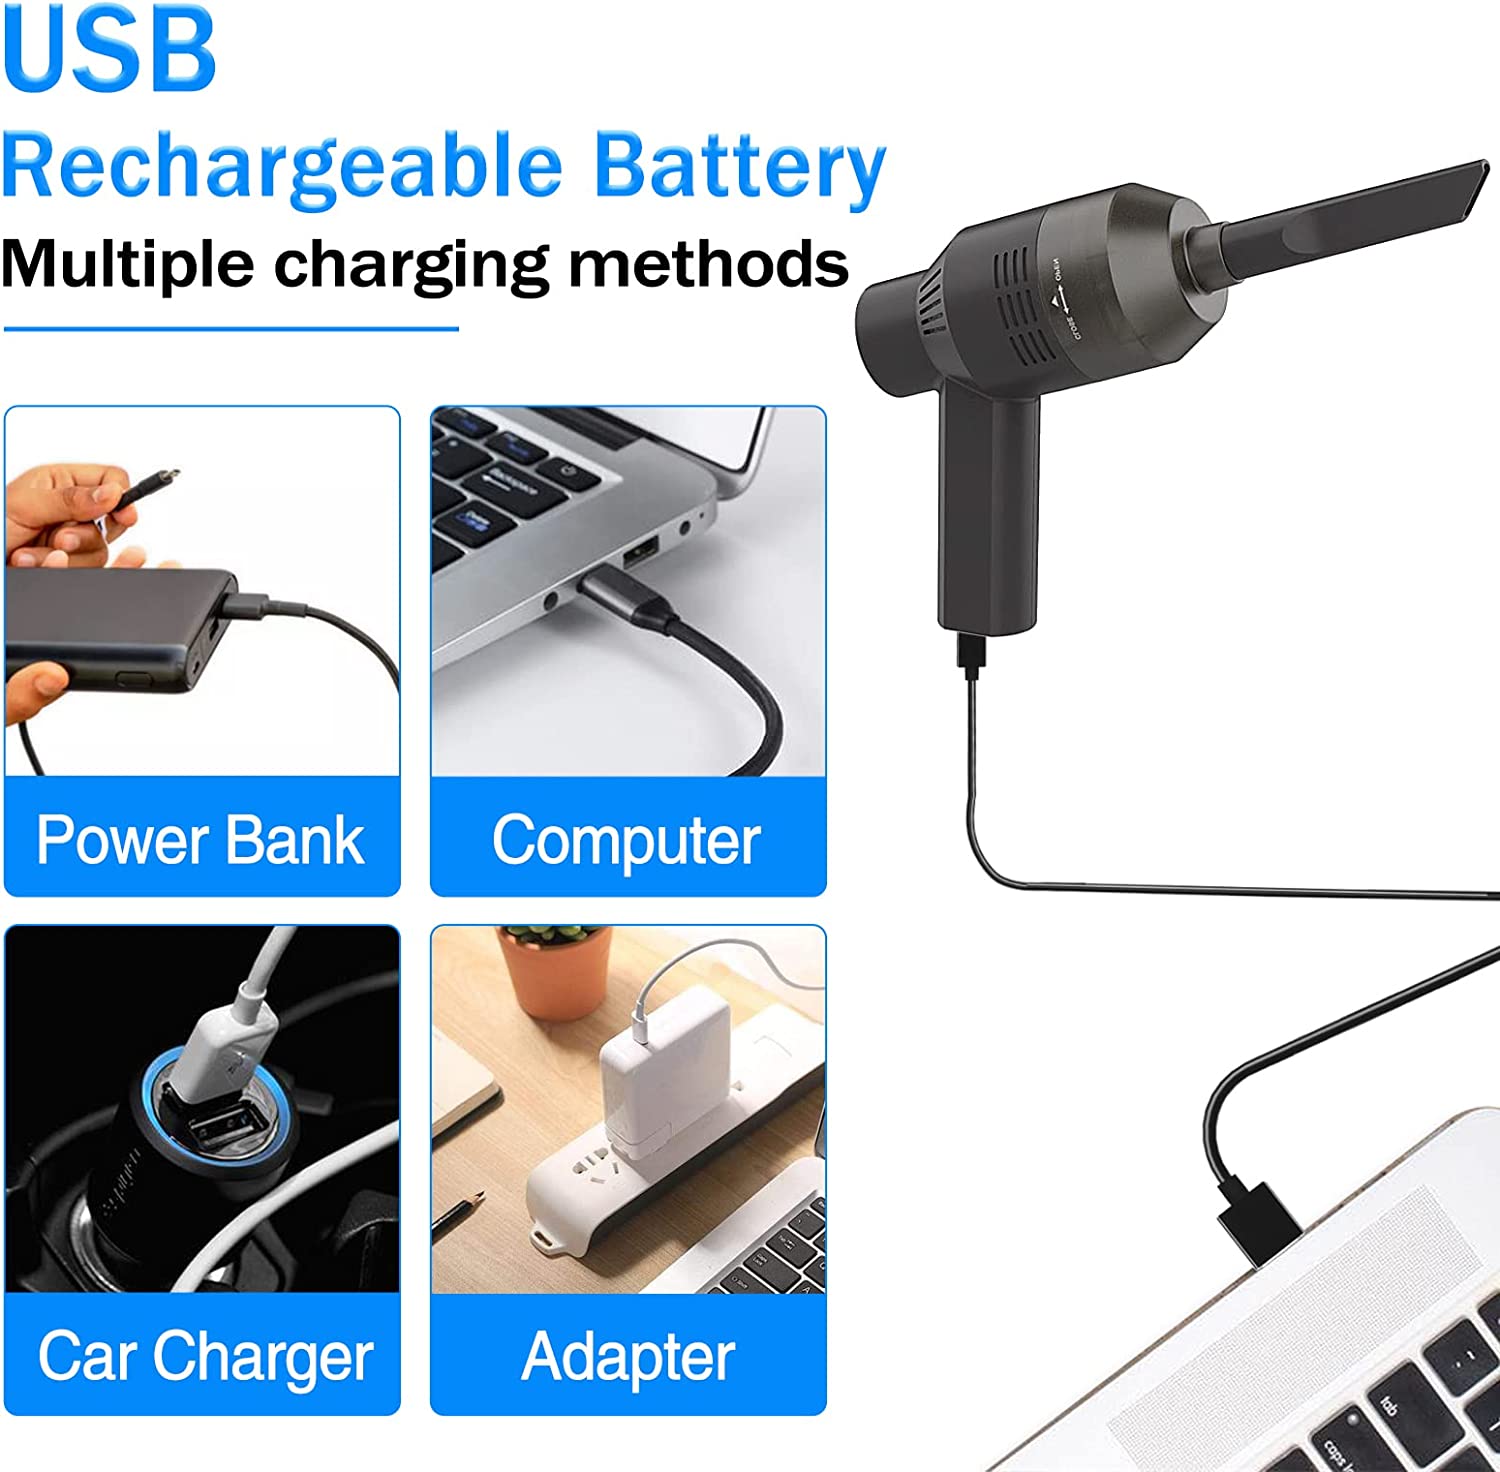 Keyboards-Keyboard-Cleaner-Powerful-Rechargeable-Mini-Vacuum-Cleaner-Cordless-Portable-Vacuum-Cleaner-Tool-for-Cleaning-Dust-Crumbs-Scraps-for-Laptop-Computer-36